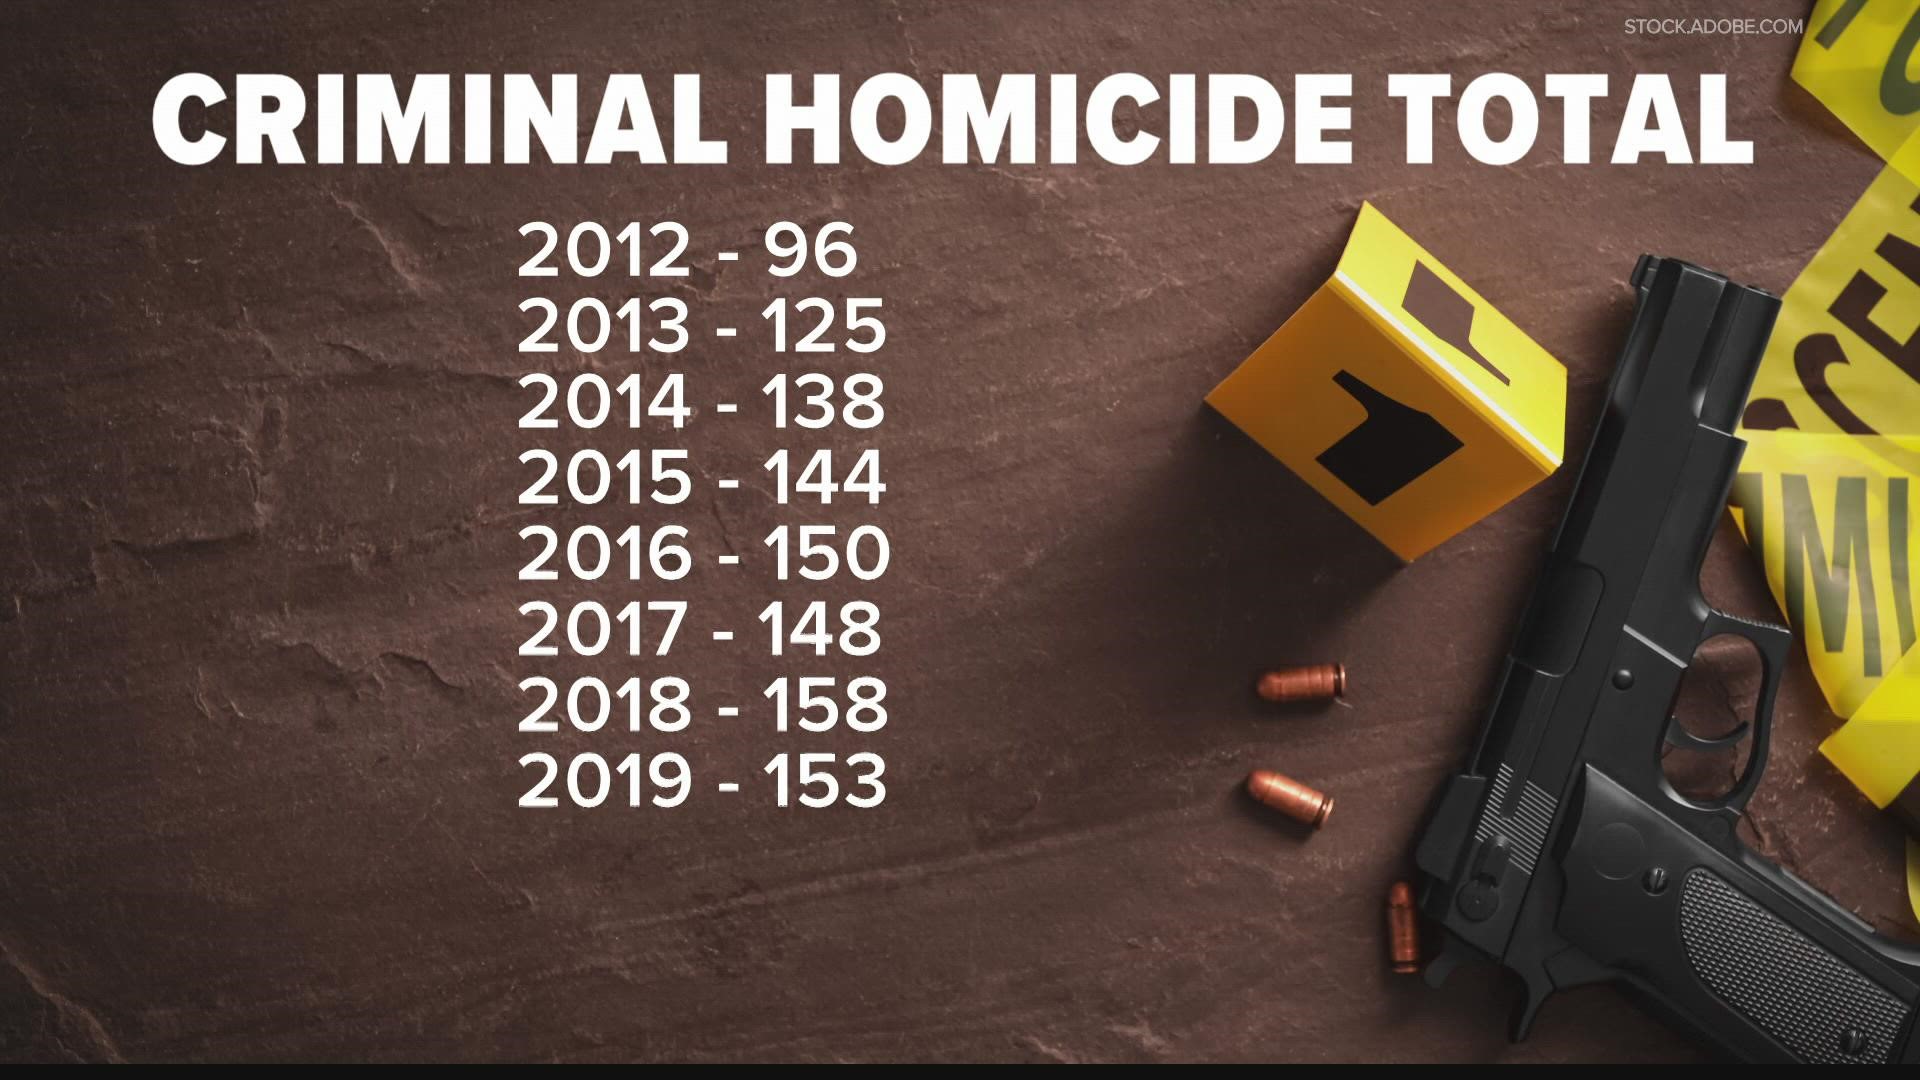 In 2020, Indianapolis had 215 homicides. This year the city is on track to surpass that record after recording its 200th homicide over the weekend.